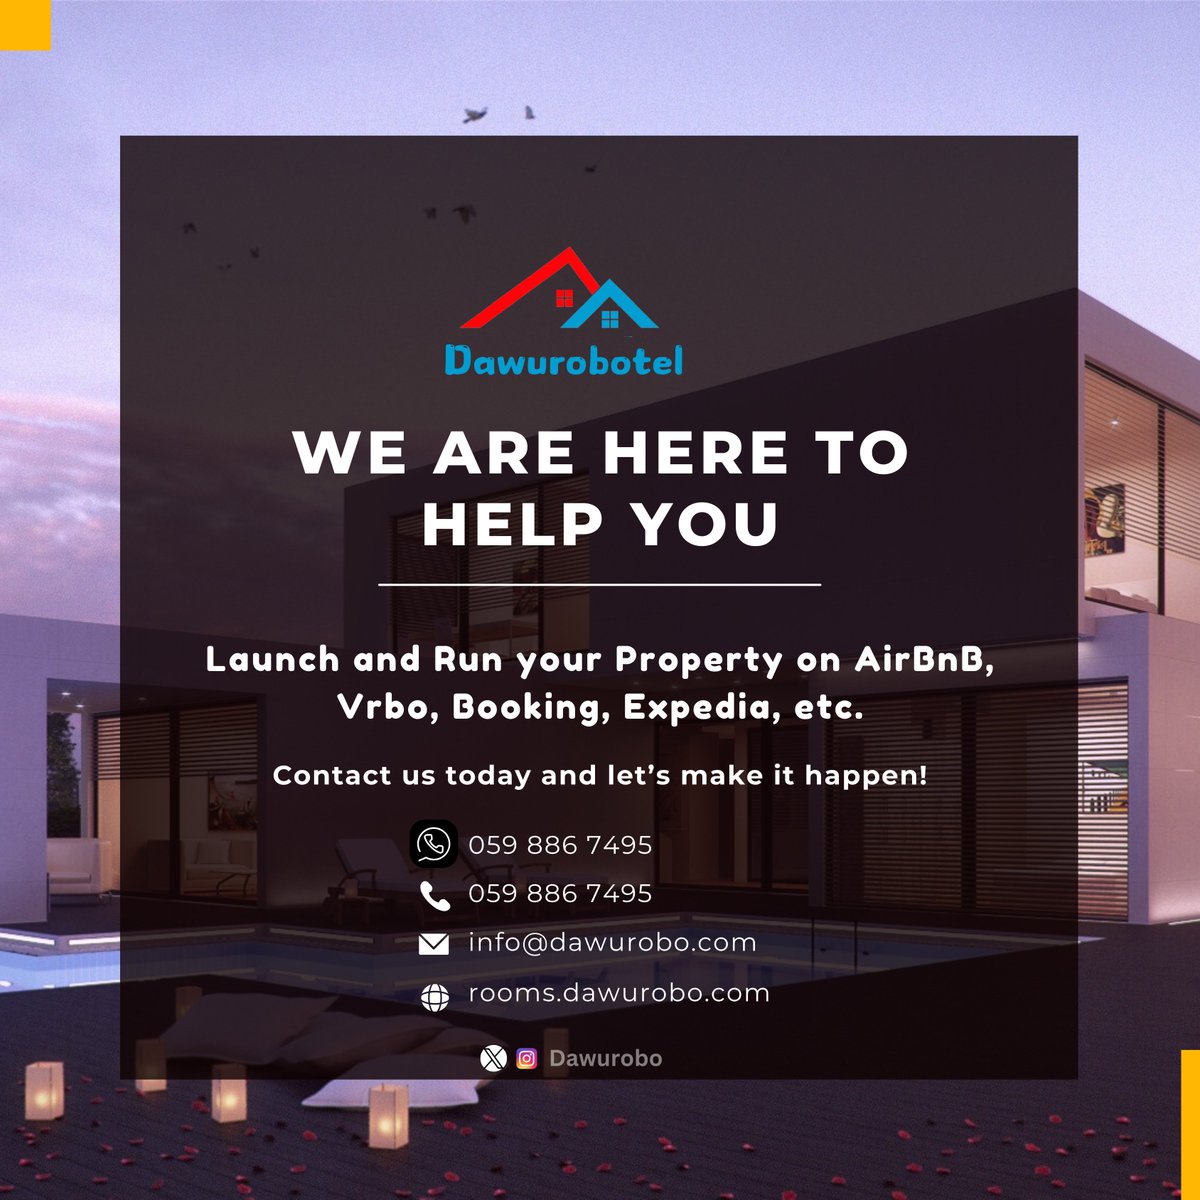 Launch and Run your Property on Airbnb, Vrbo, Booking, Expedia, etc. Don't just list your property, manage it like a pro! Contact us on 0598867495.
#airbnb #Airbnbhost #UPSA 
Kyeiwaa    Messi
Rapture    Elon Musk
Jessica   King Promise